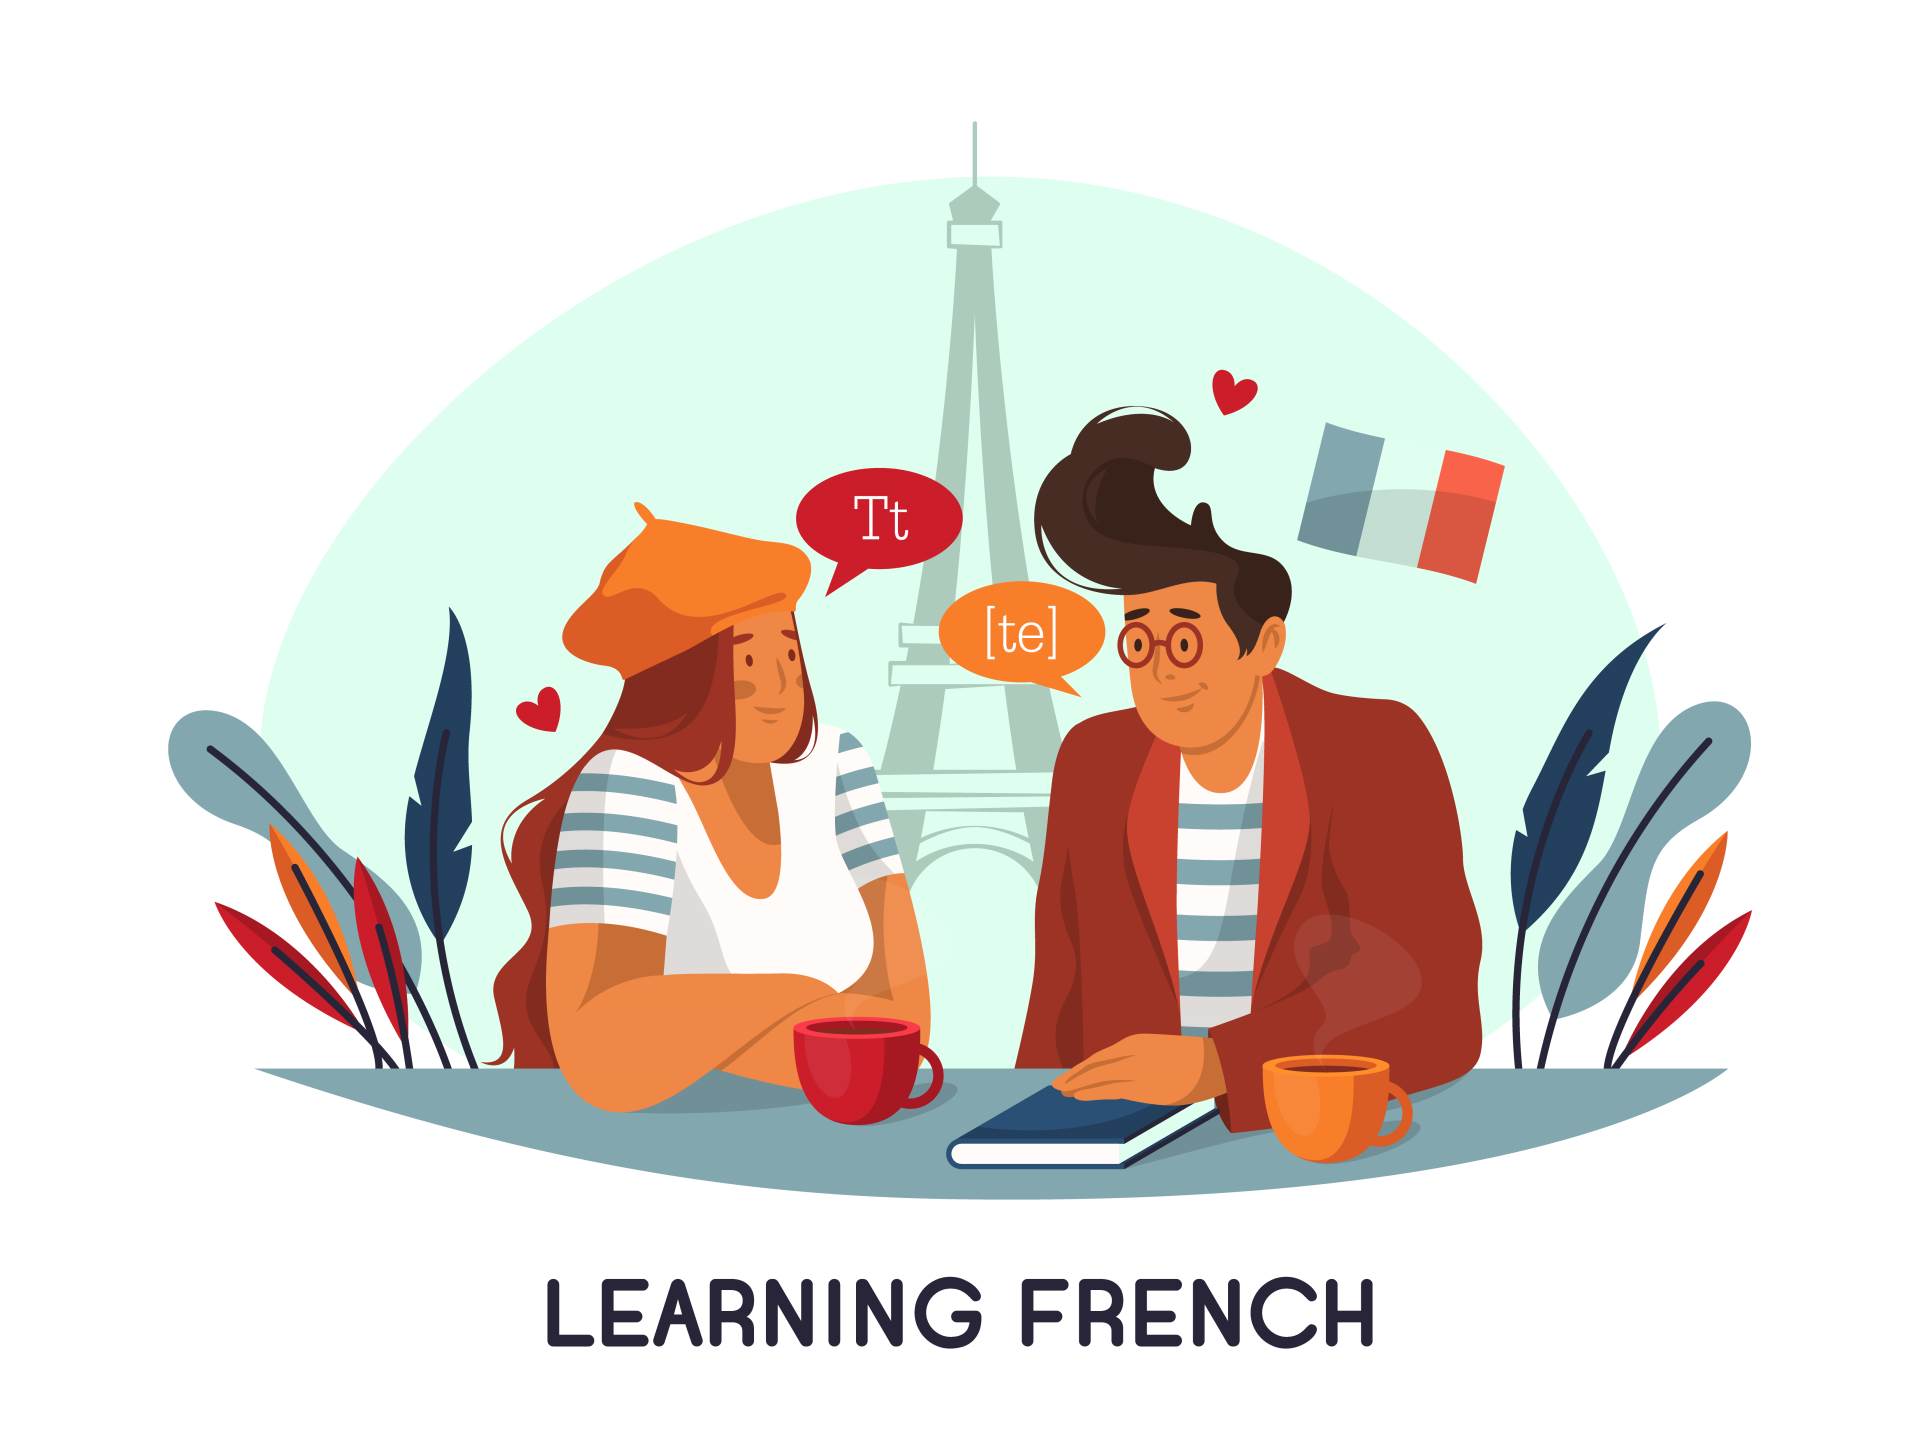  Trust our <a href="https://www.msmunify.com/">study abroad consultants</a> to guide you while conquering French language challenges. Achieve your global education dreams!  

Read the blog  - <a href="https://www.msmunify.com/blogs/top-french-language-mistakes/">Top French Language Mistakes</a>
